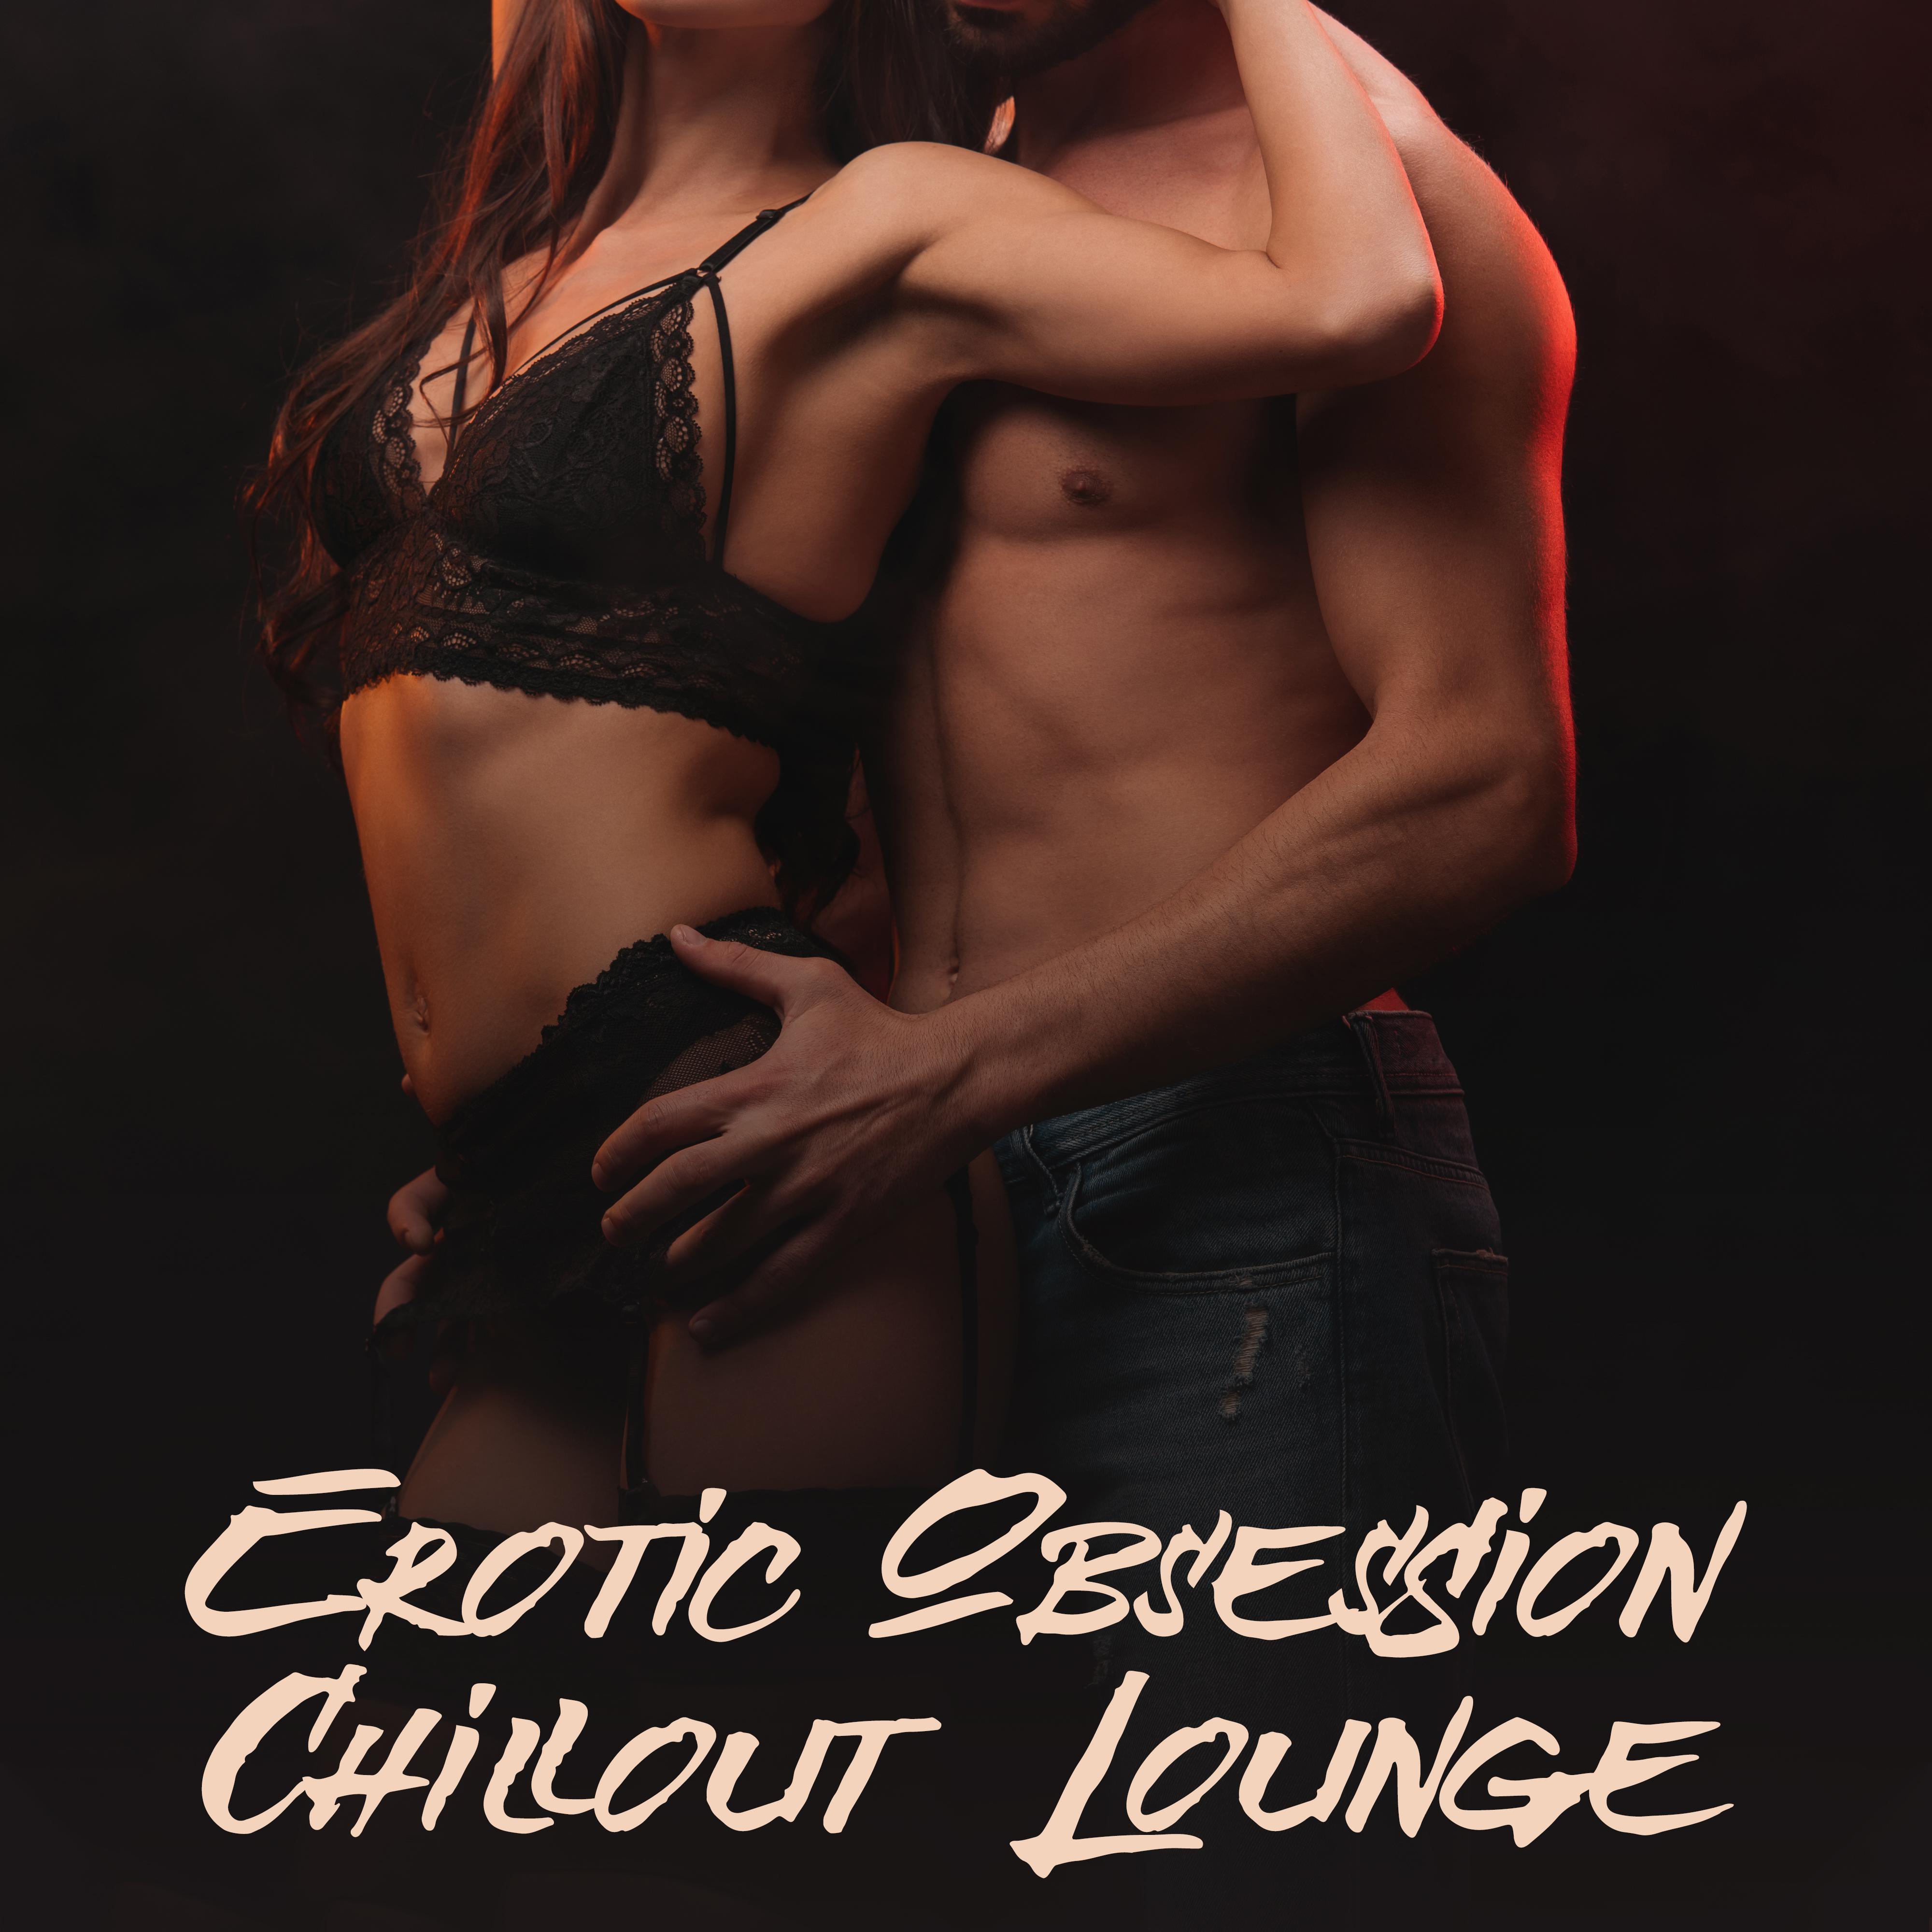 Erotic Obsession Chillout Lounge: Top 2019 Chill Out Electronic Sensual Vibes for Lovers, Music Full of ****** Lust, Tantric *** Songs, Hot Baths & Erotic Massage